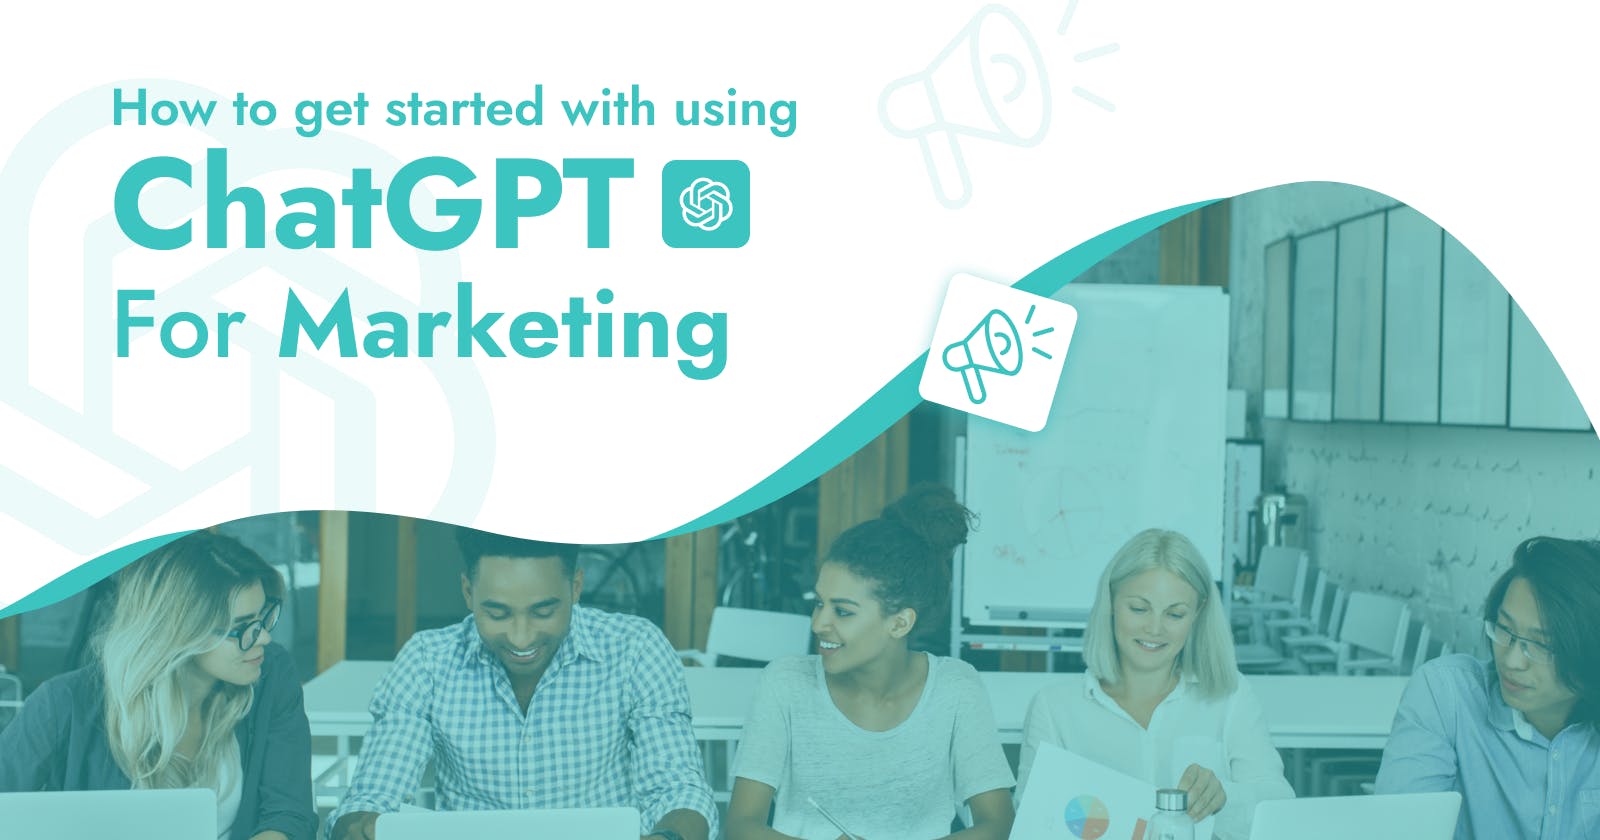 How to get started with using ChatGPT for Marketing